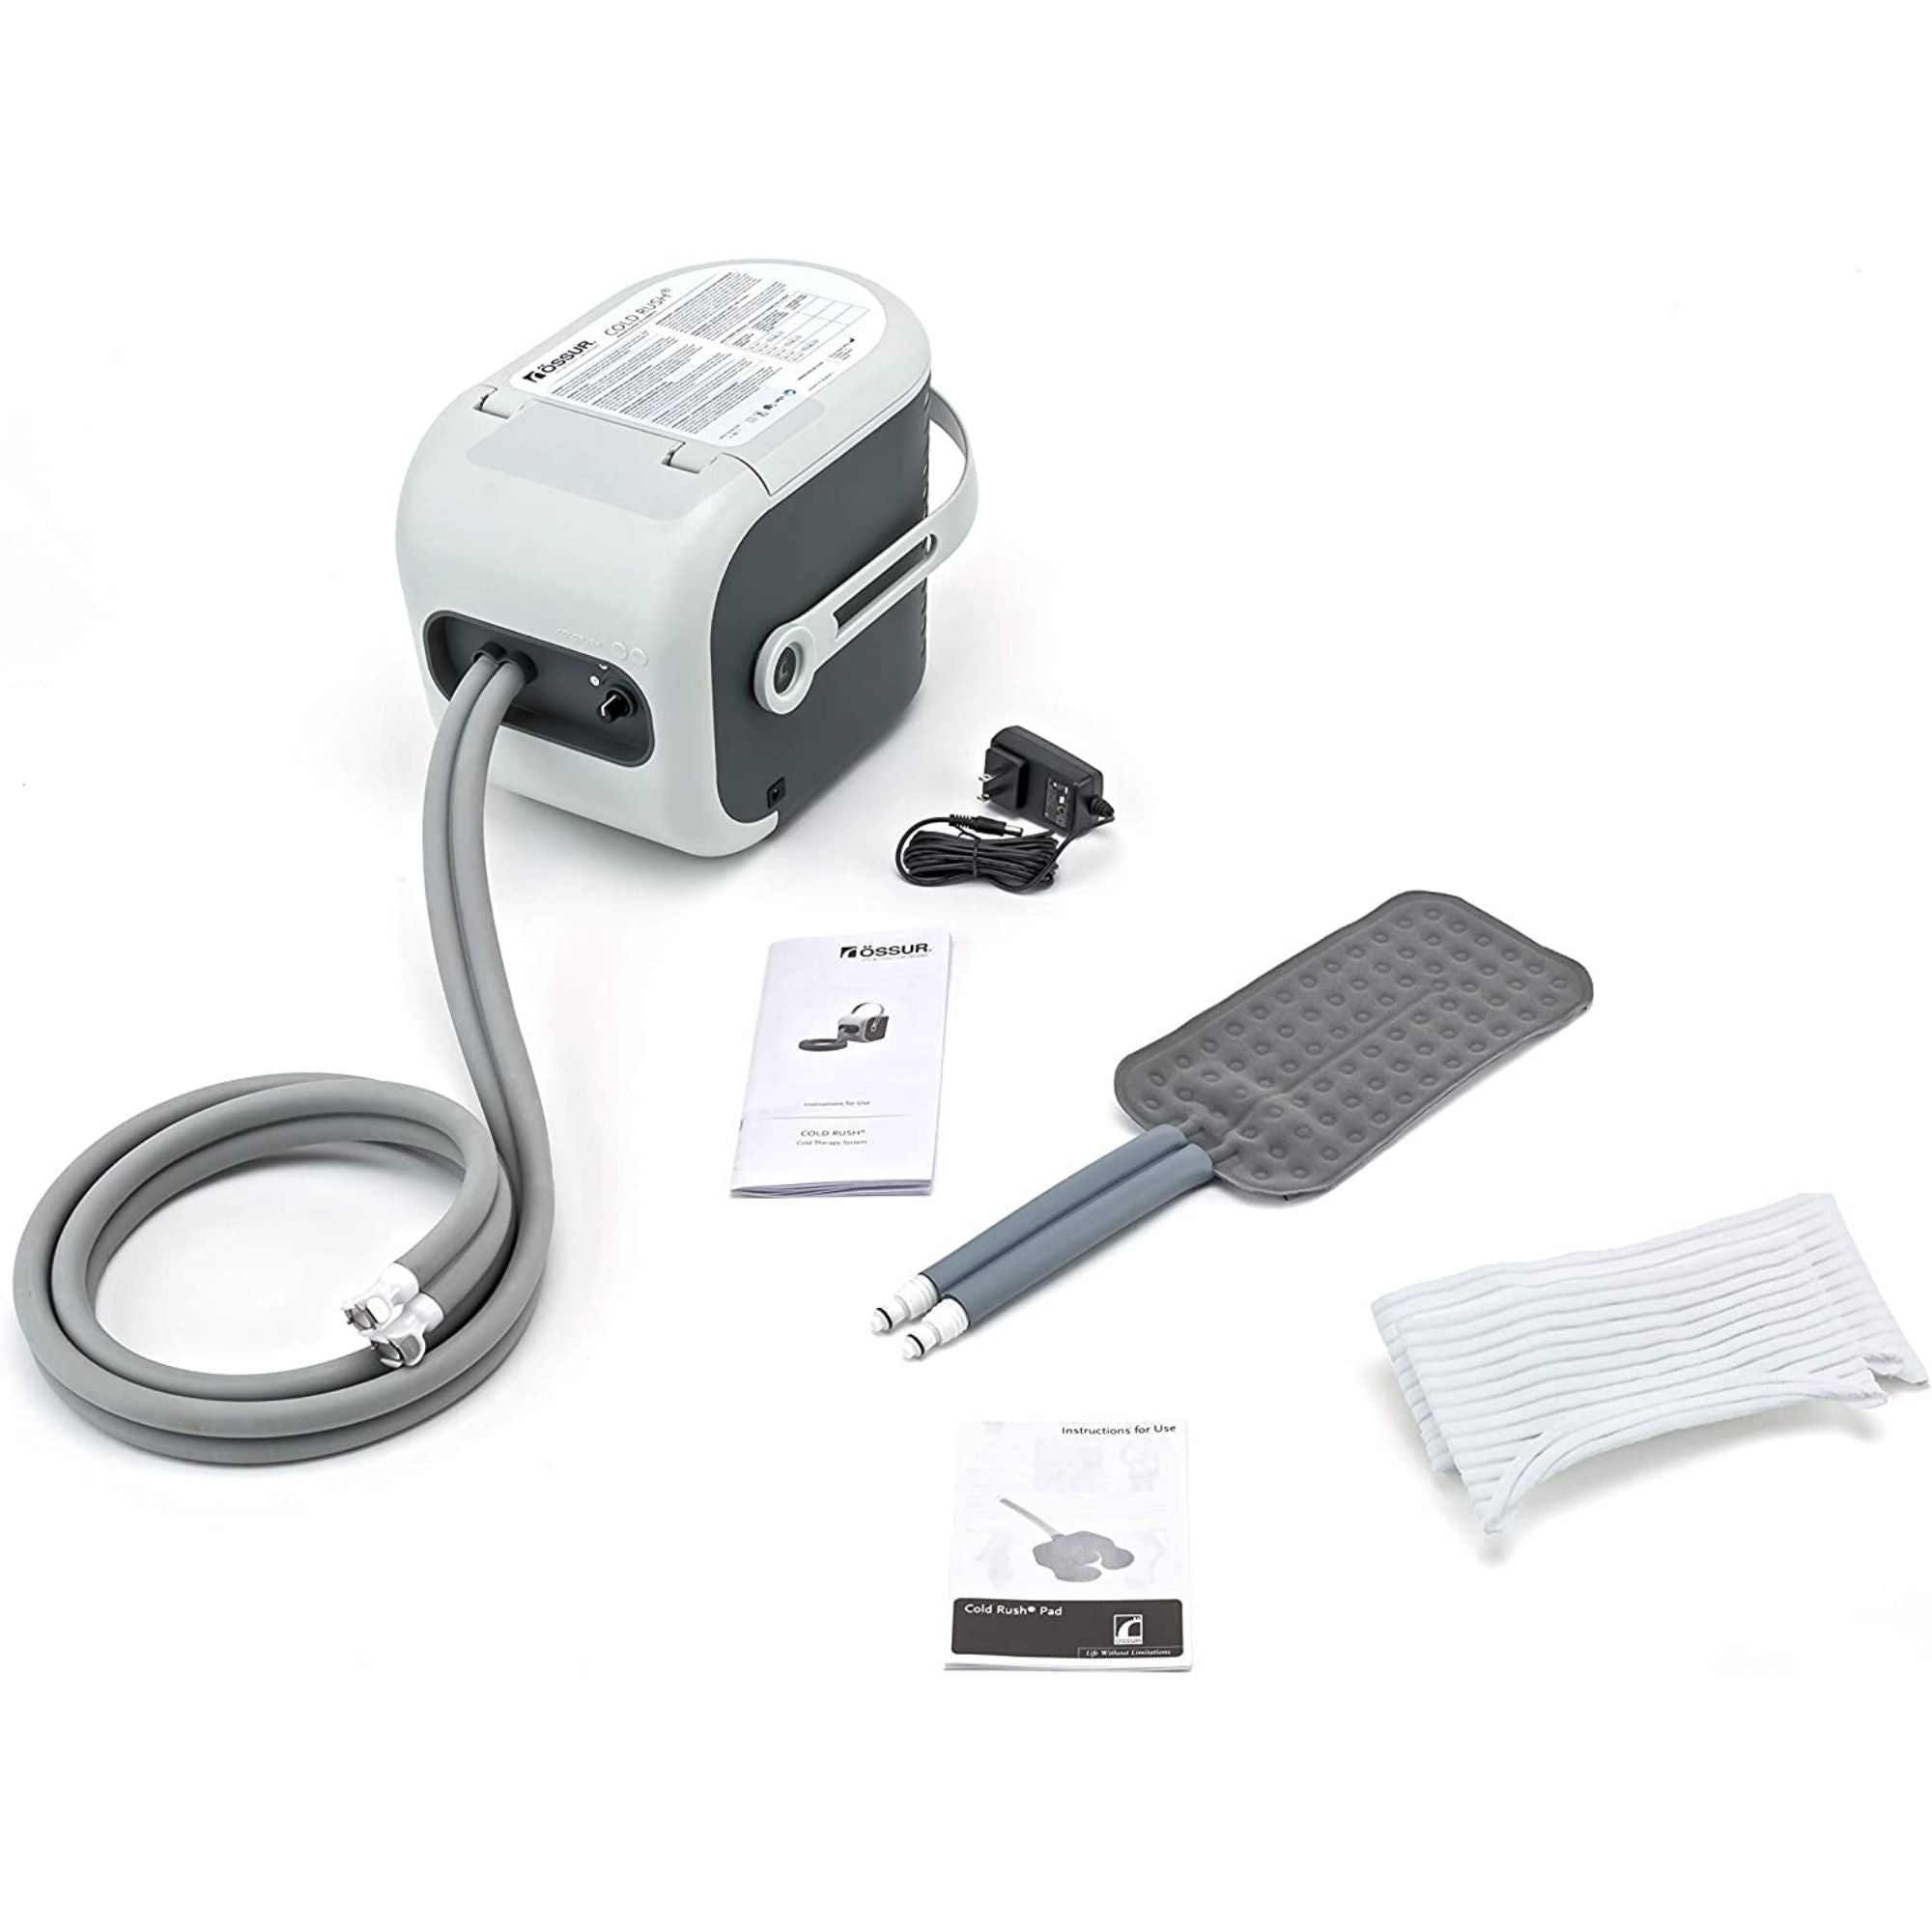 Ossur Cold Rush Therapy Machine System